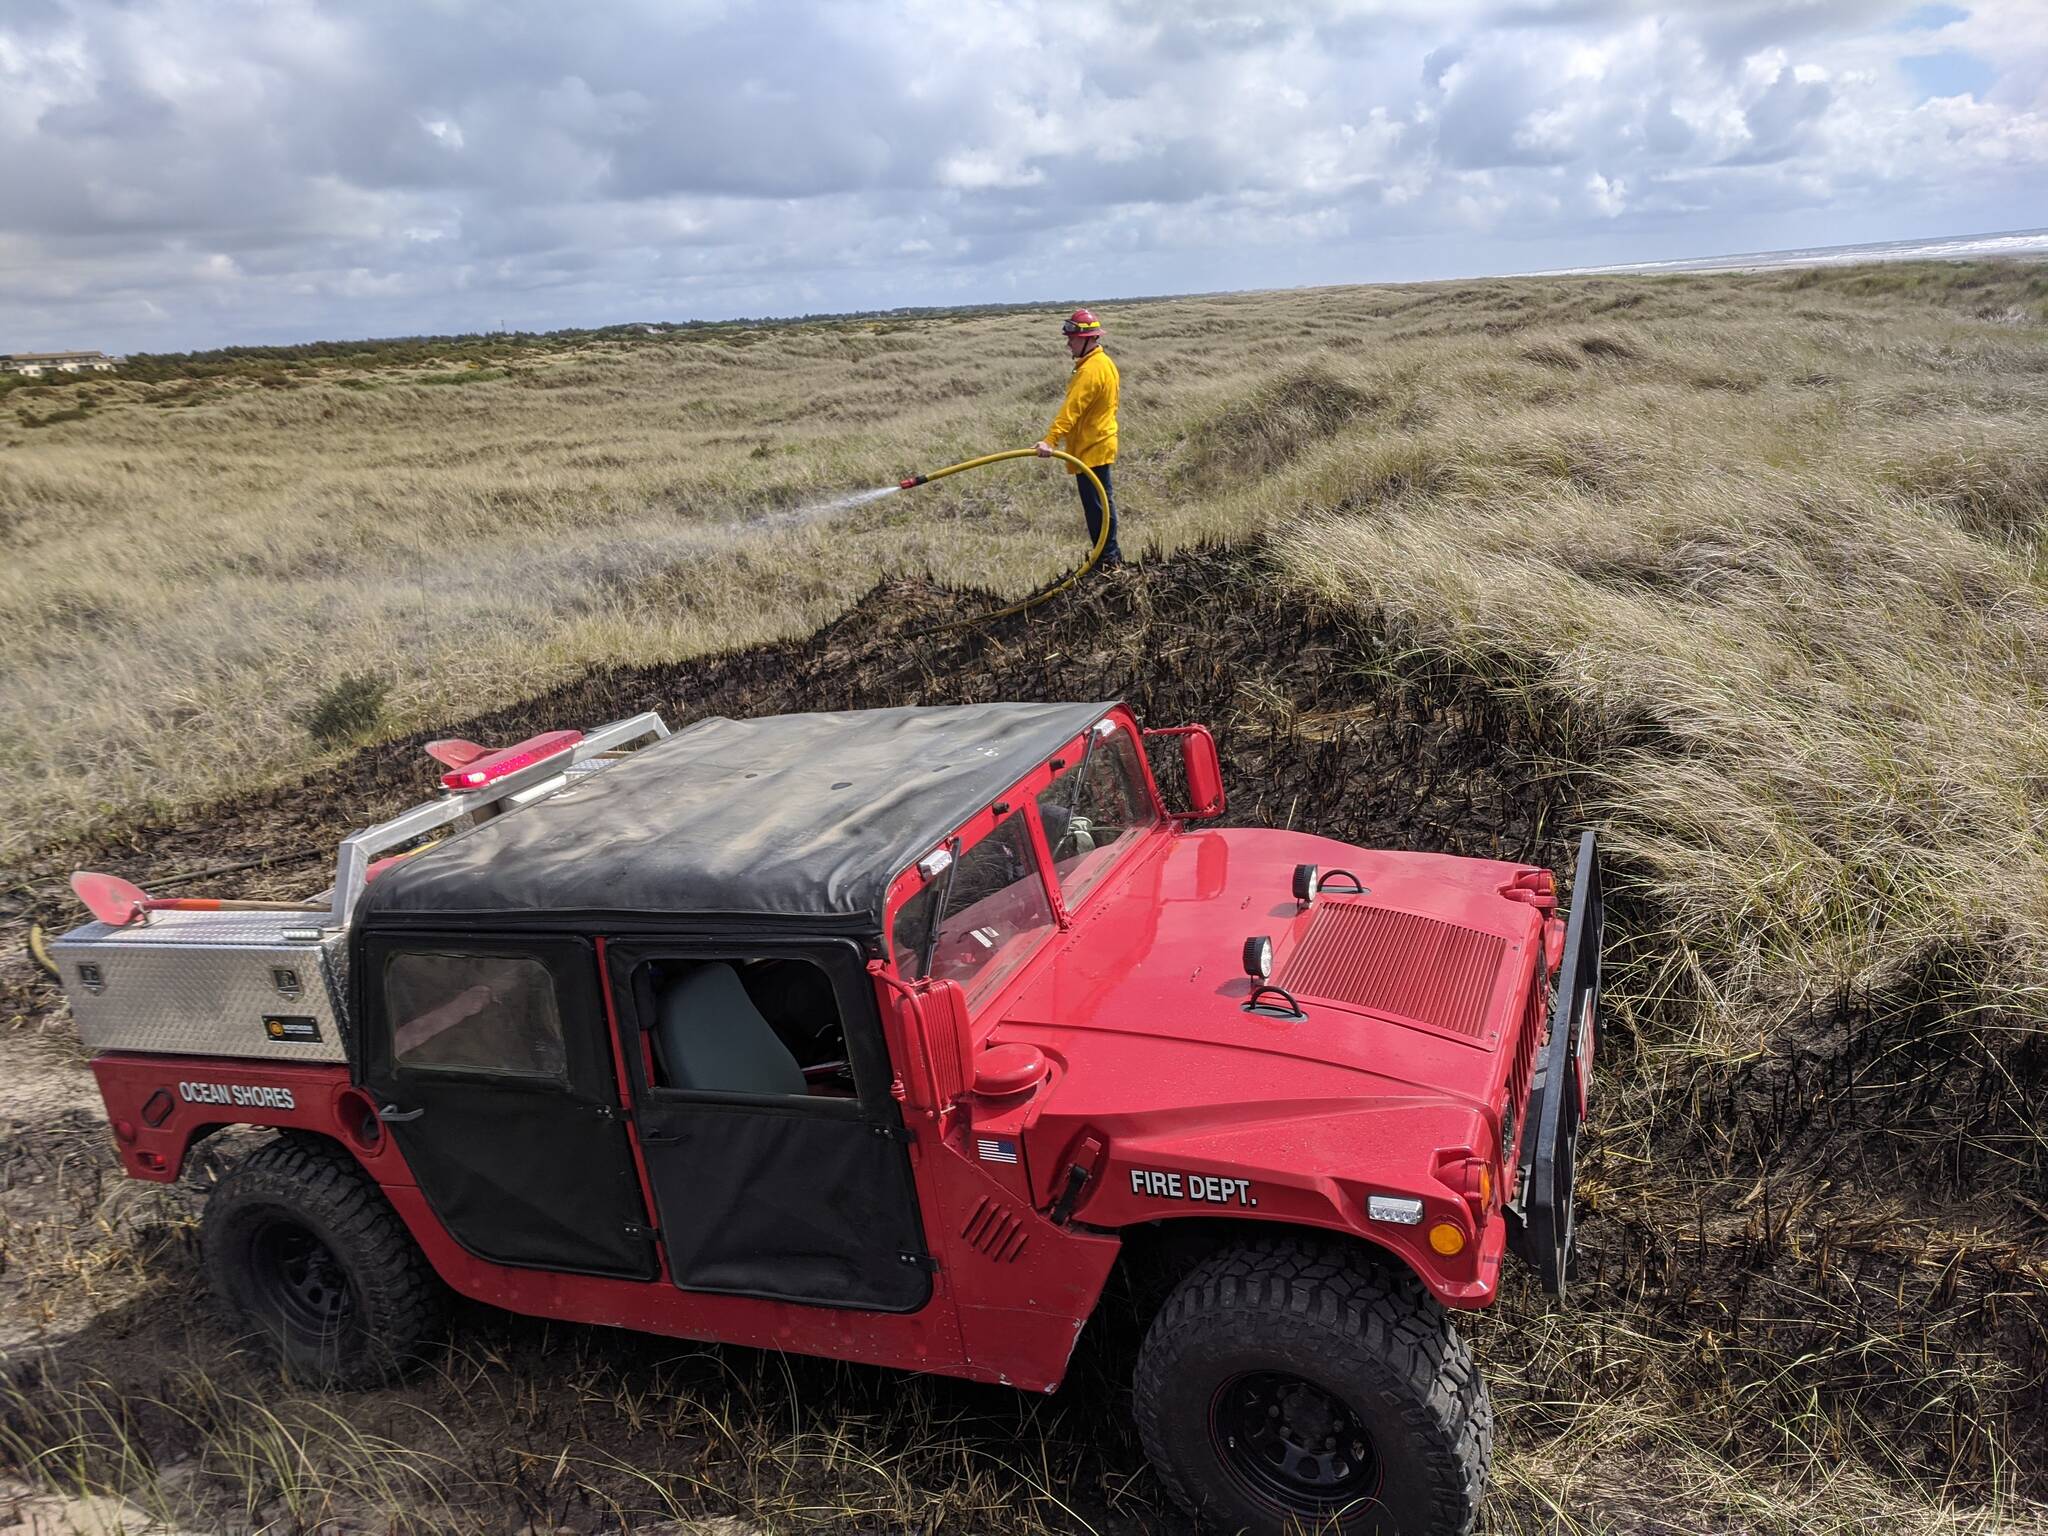 A dune fire occurred earlier this year just off Chance a La Mer beach approach. Photo courtesy of Ocean Shores Fire Department